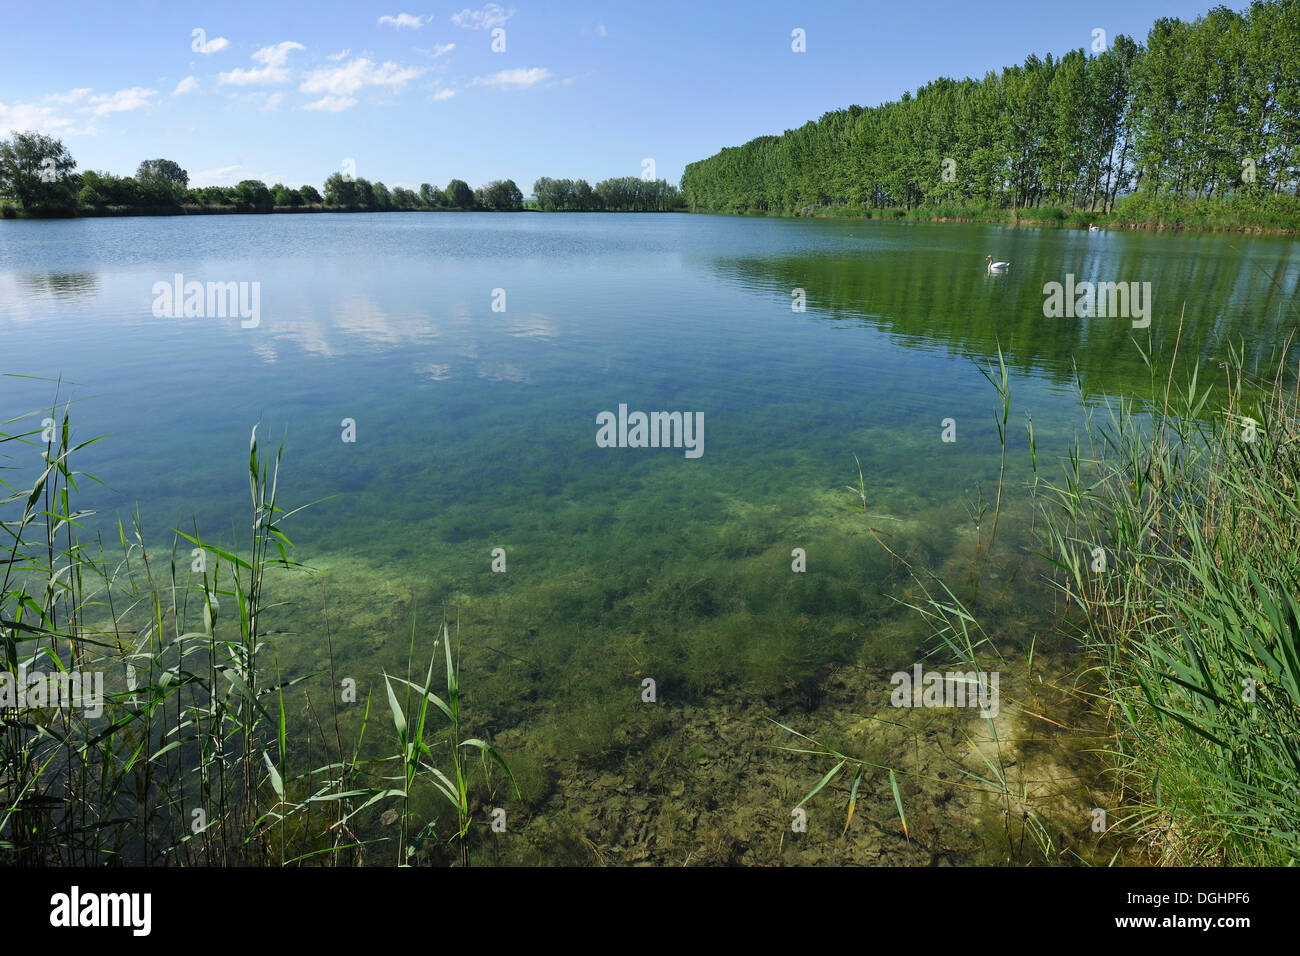 Pond landscape, renaturated opencast pits, Herbslebener Teiche Nature Reserve, Herbsleben, Thuringia, Germany Stock Photo